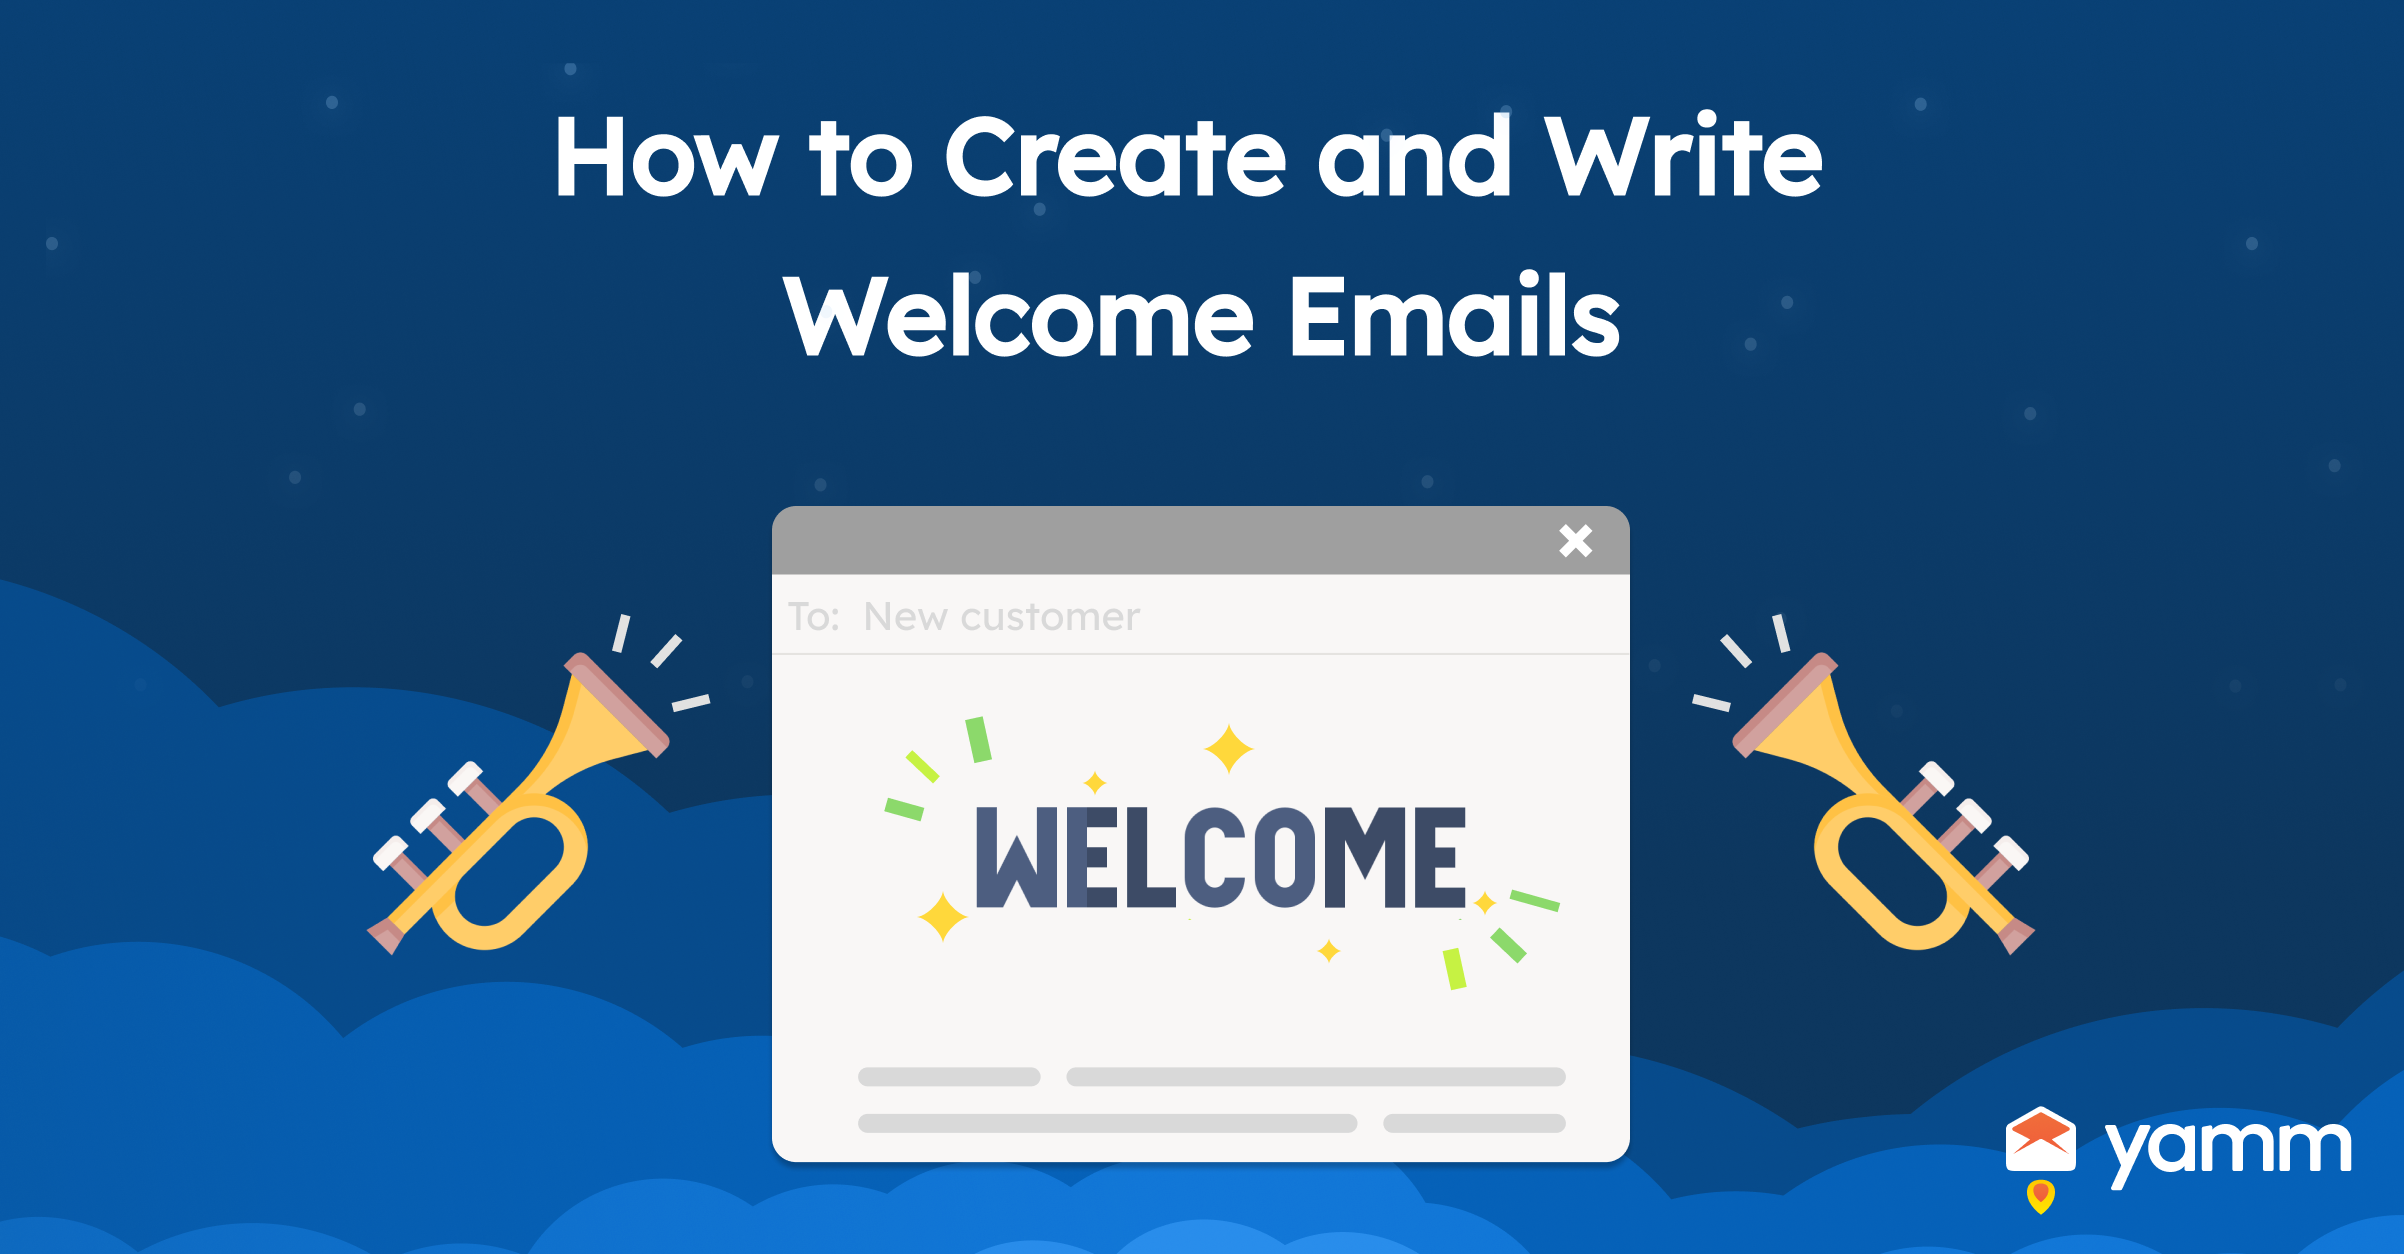 How to Create and Write Welcome Emails